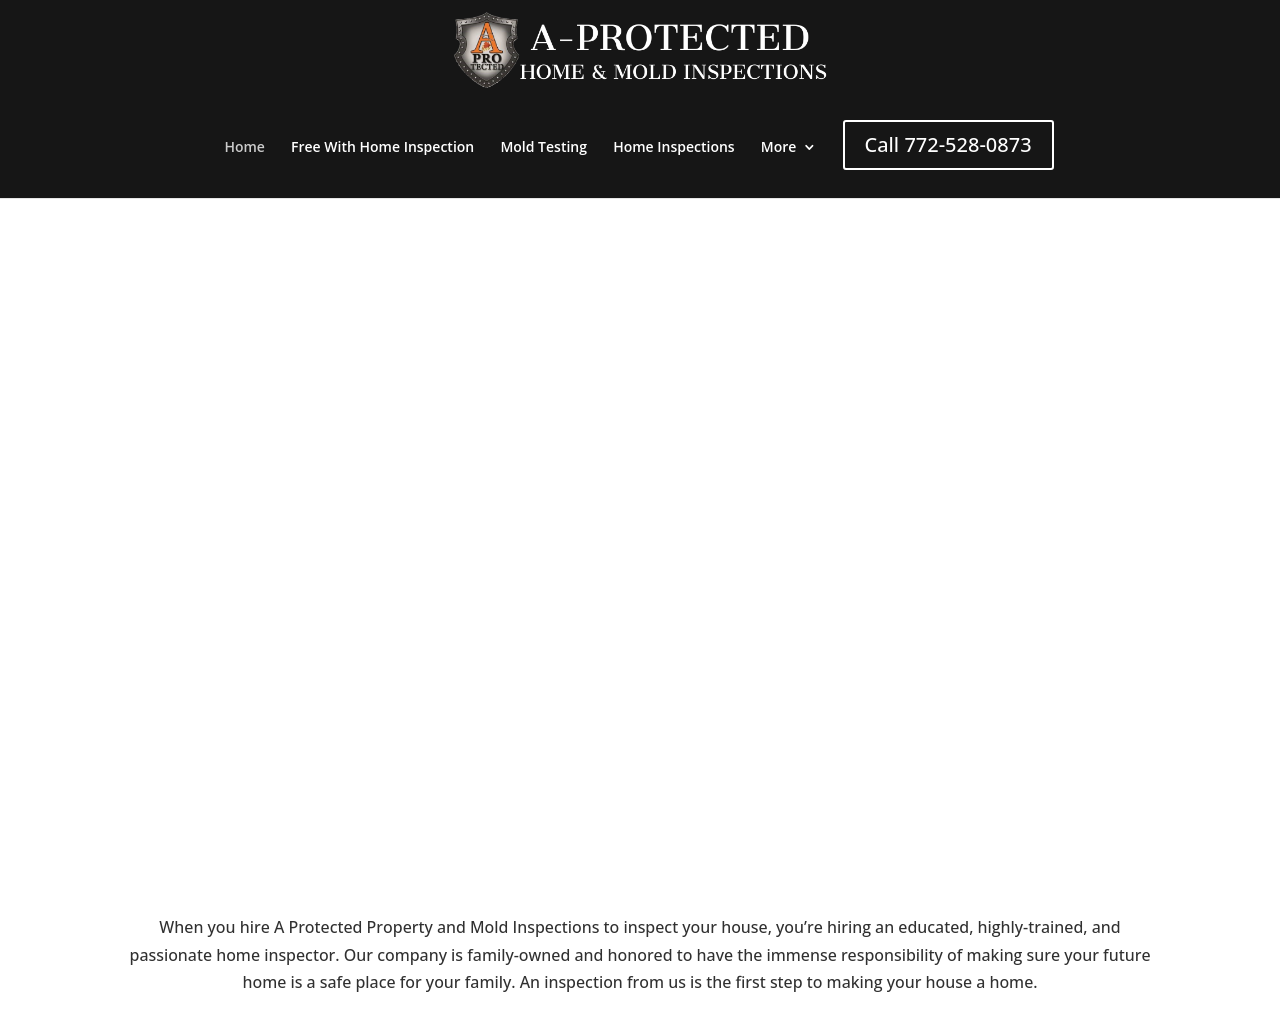 aprotected.net